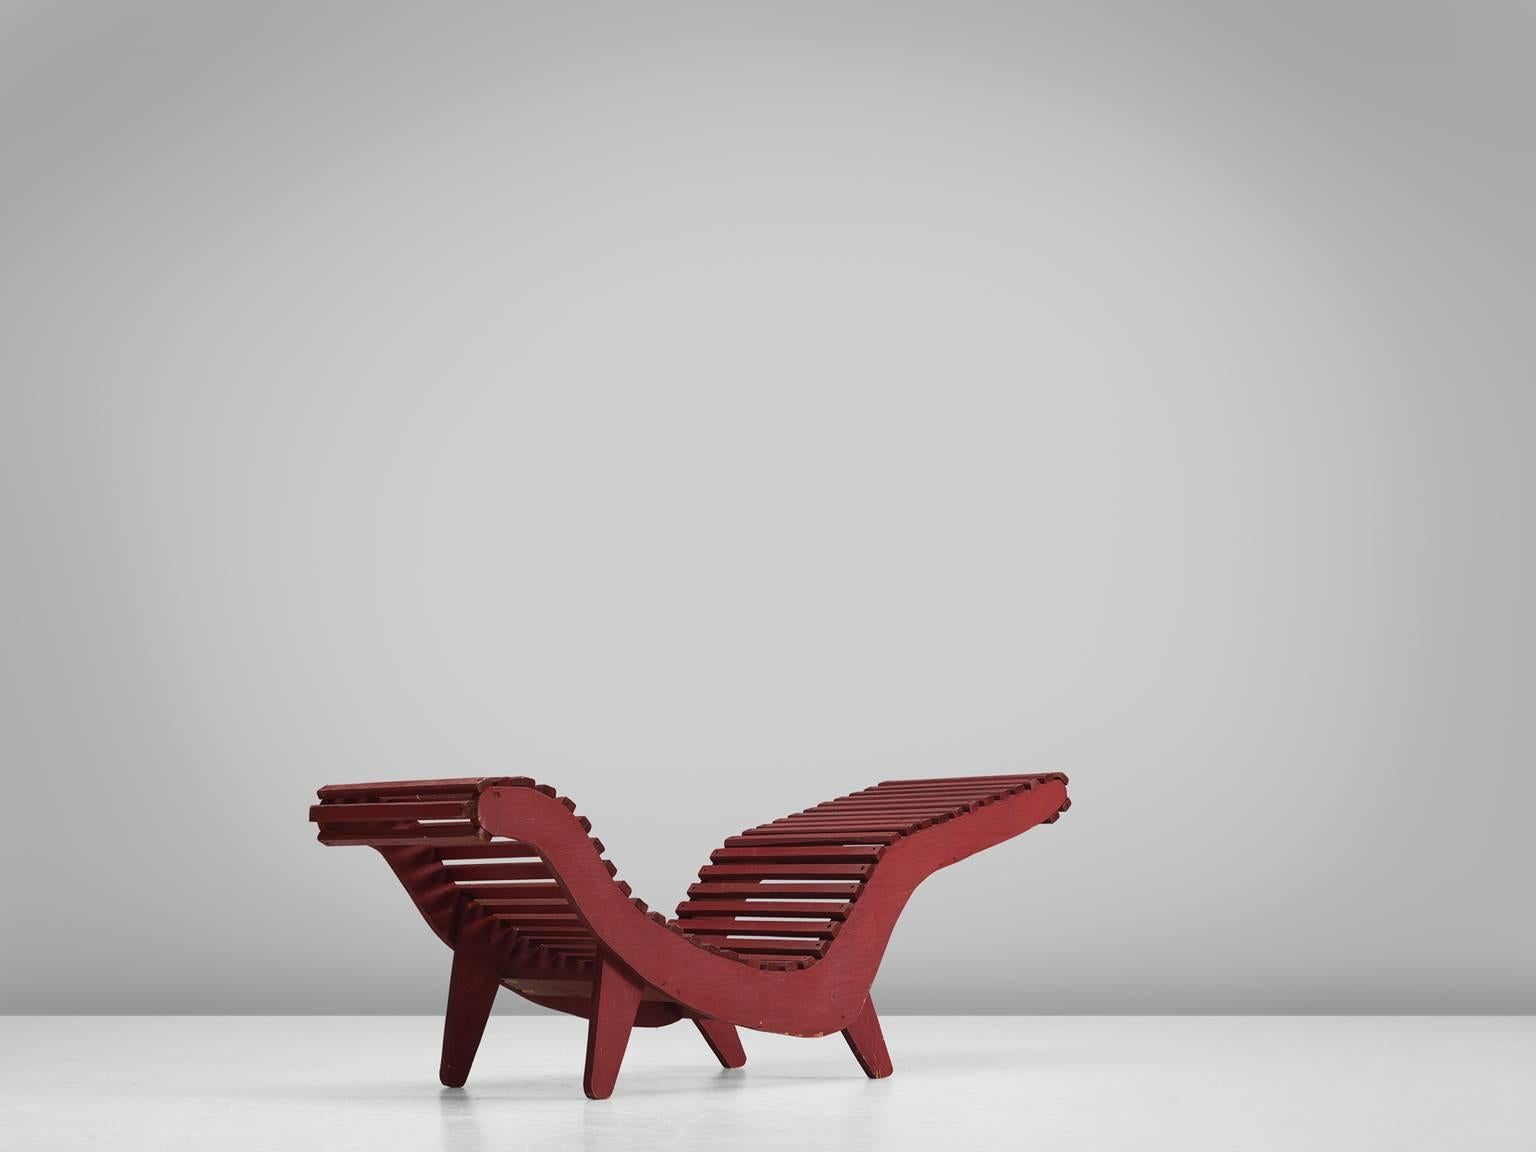 Lounge chair 'C5', deep red wood, plywood, United States, 1950s.

These three red wooden slat ‘C5’ chaise lounges from the 1950s were designed by Klaus Grabe. The core of this design is the curvaceous plywood frame. Plywood was a new material and